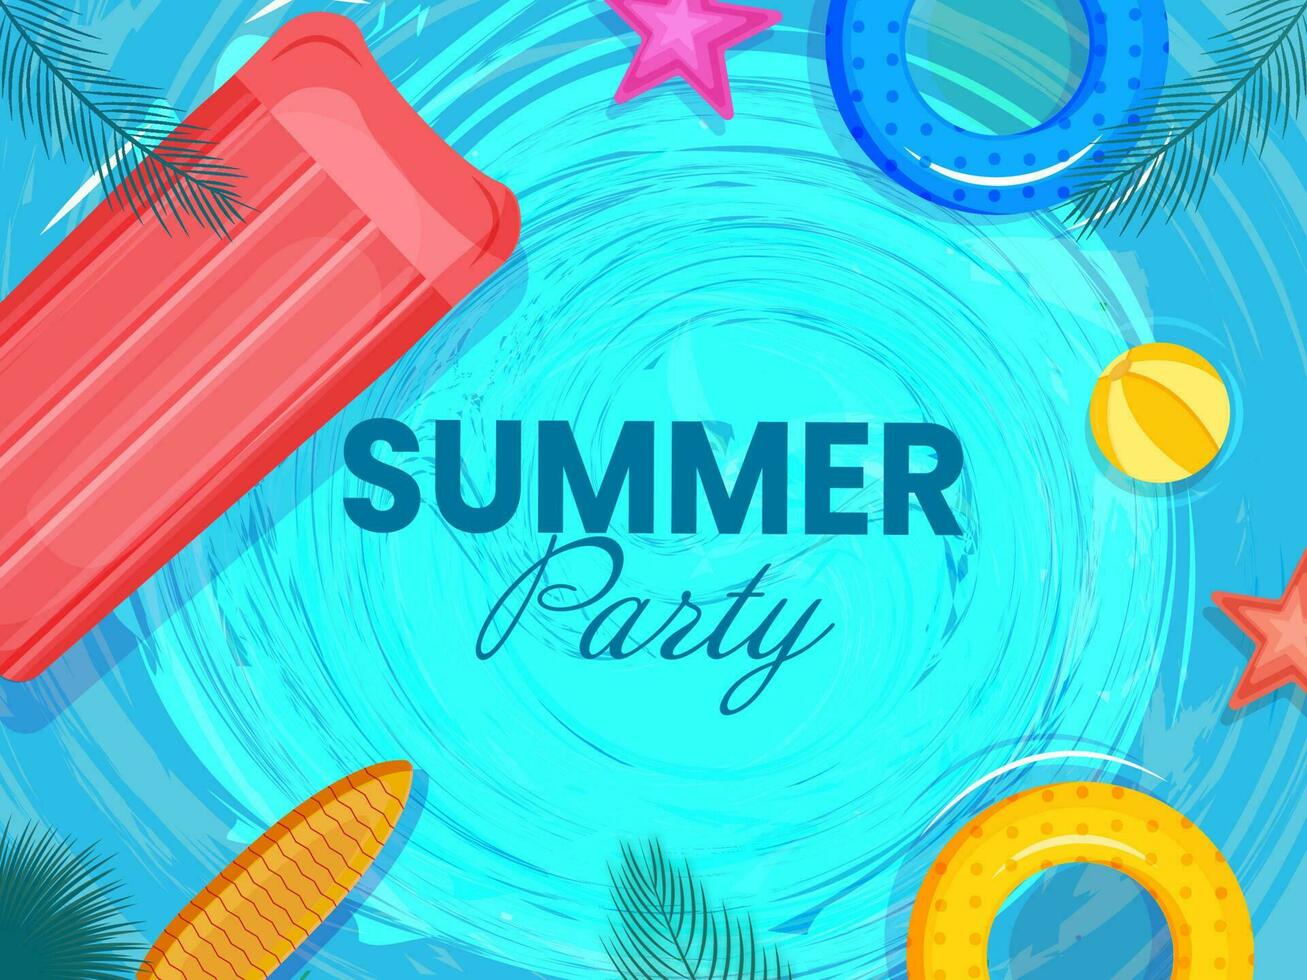 Summer Party Lettering With Top View Of Inflatable Water Bed, Lifebuoy, Beach Ball, Star, Surfboard And Palm Leaves On Blue Brush Stroke Background. vector